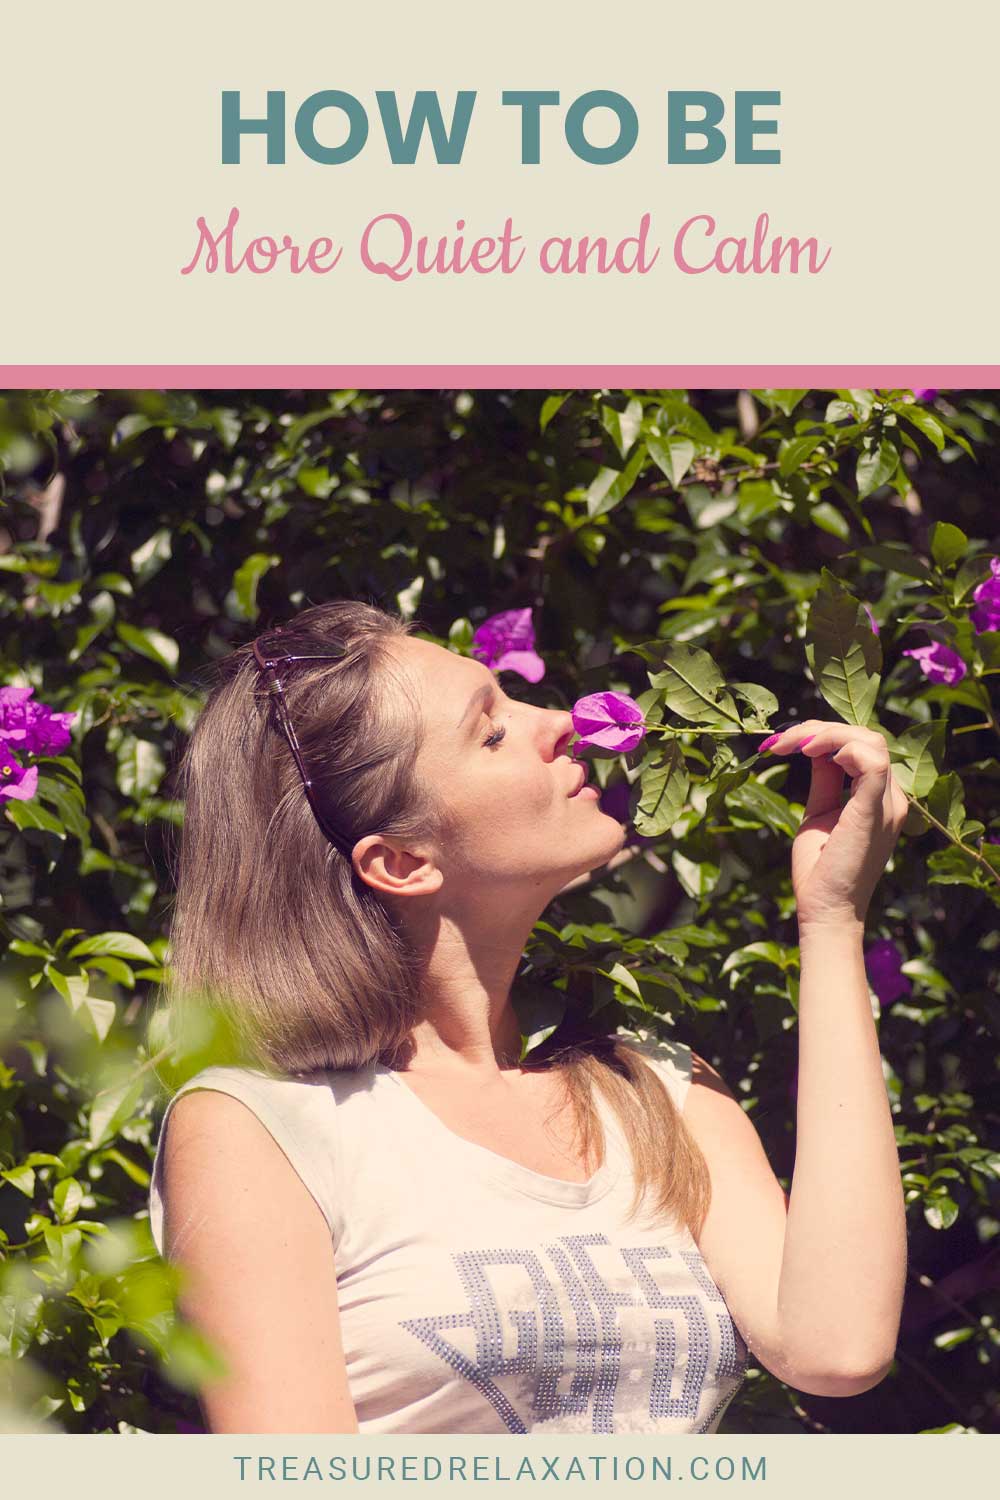 How To Be More Quiet and Calm